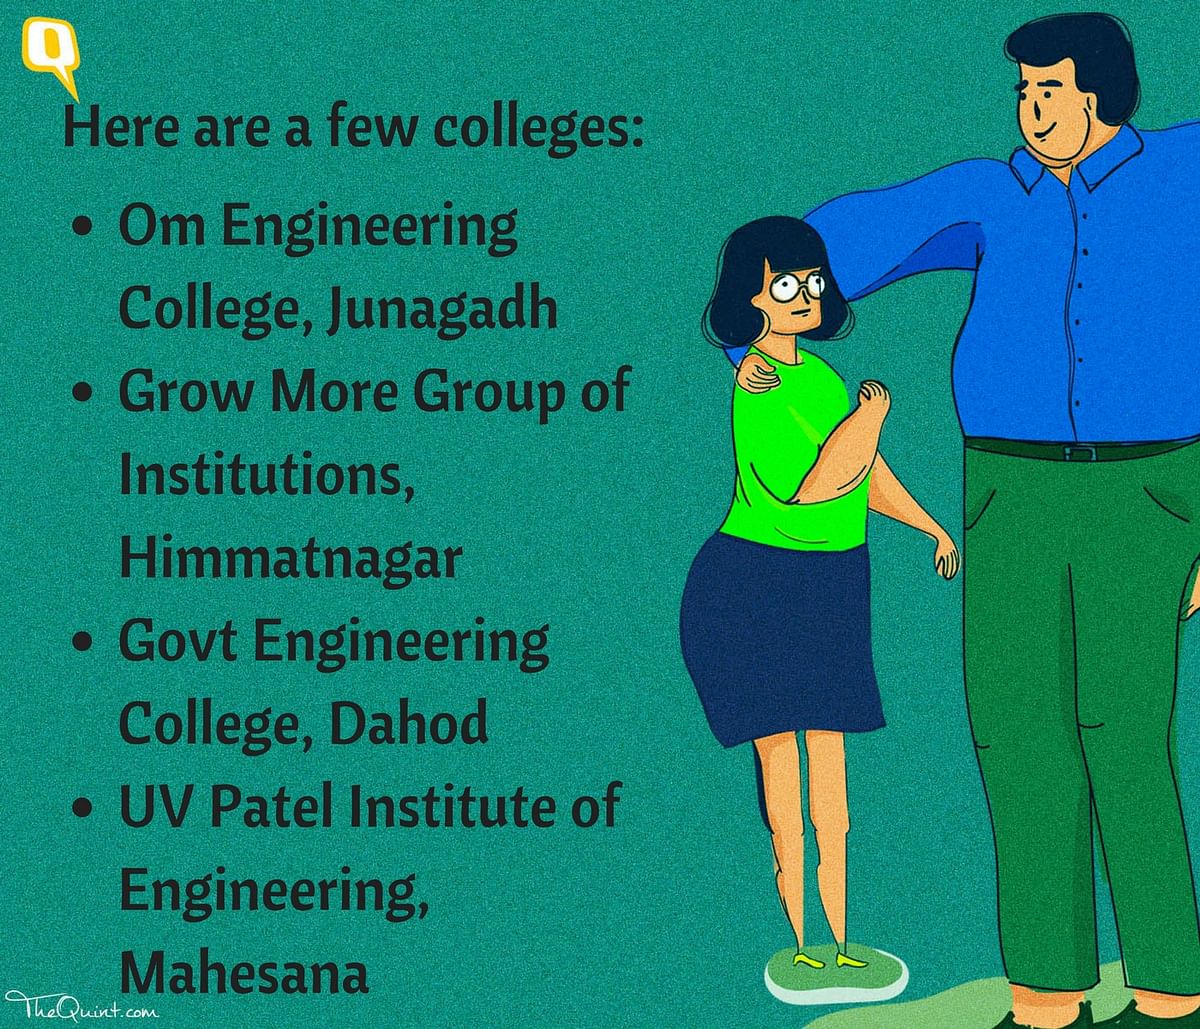 The Quint now has educational experts from CollegeDekho on board to answer all your admission queries.